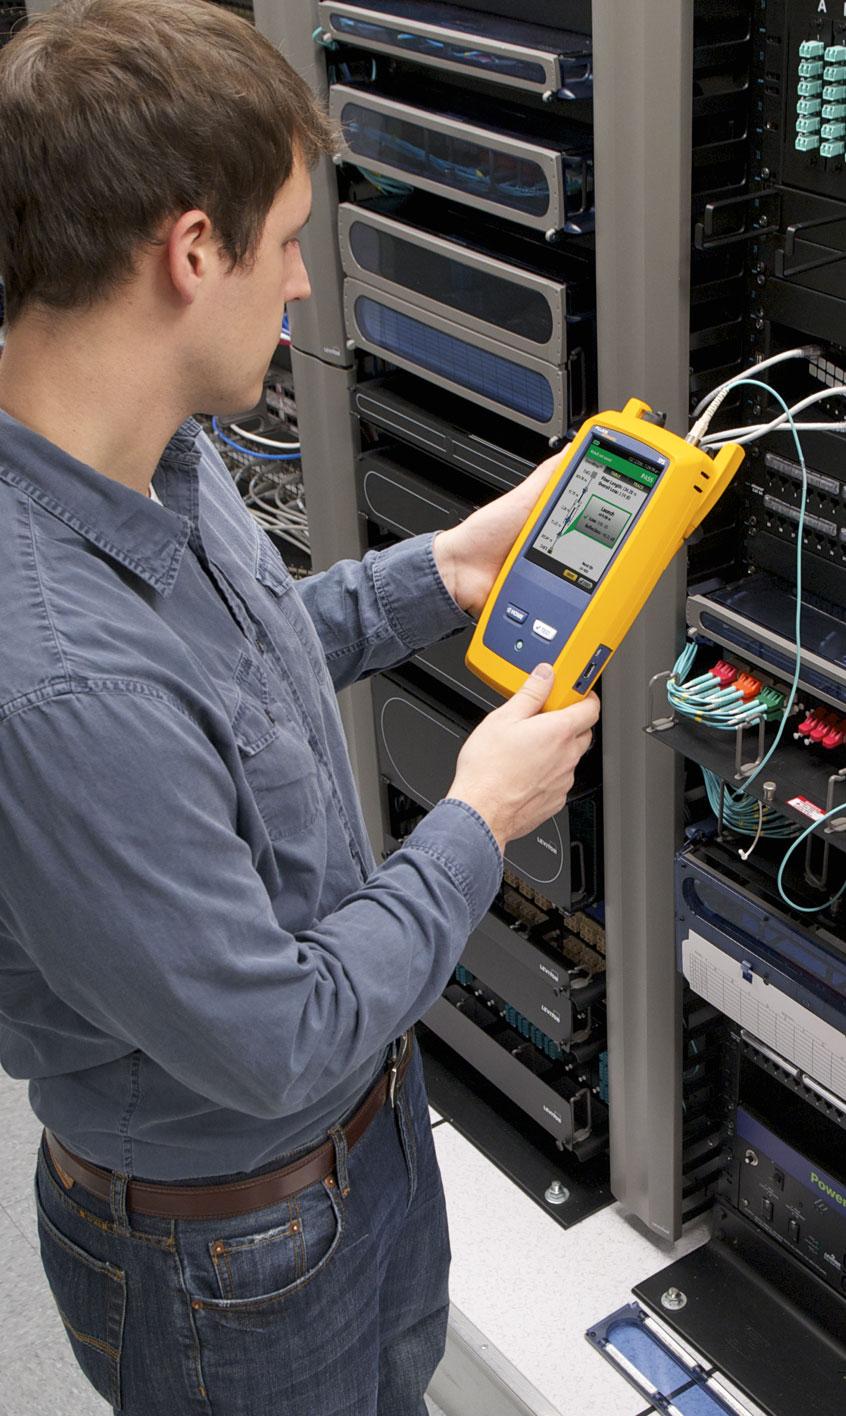 Performance: Standards: Test times as short as two seconds in Quick Test mode Quickly test datacenter fiber with pre-programmed settings Troubleshoot datacenter fiber links with short patch cables